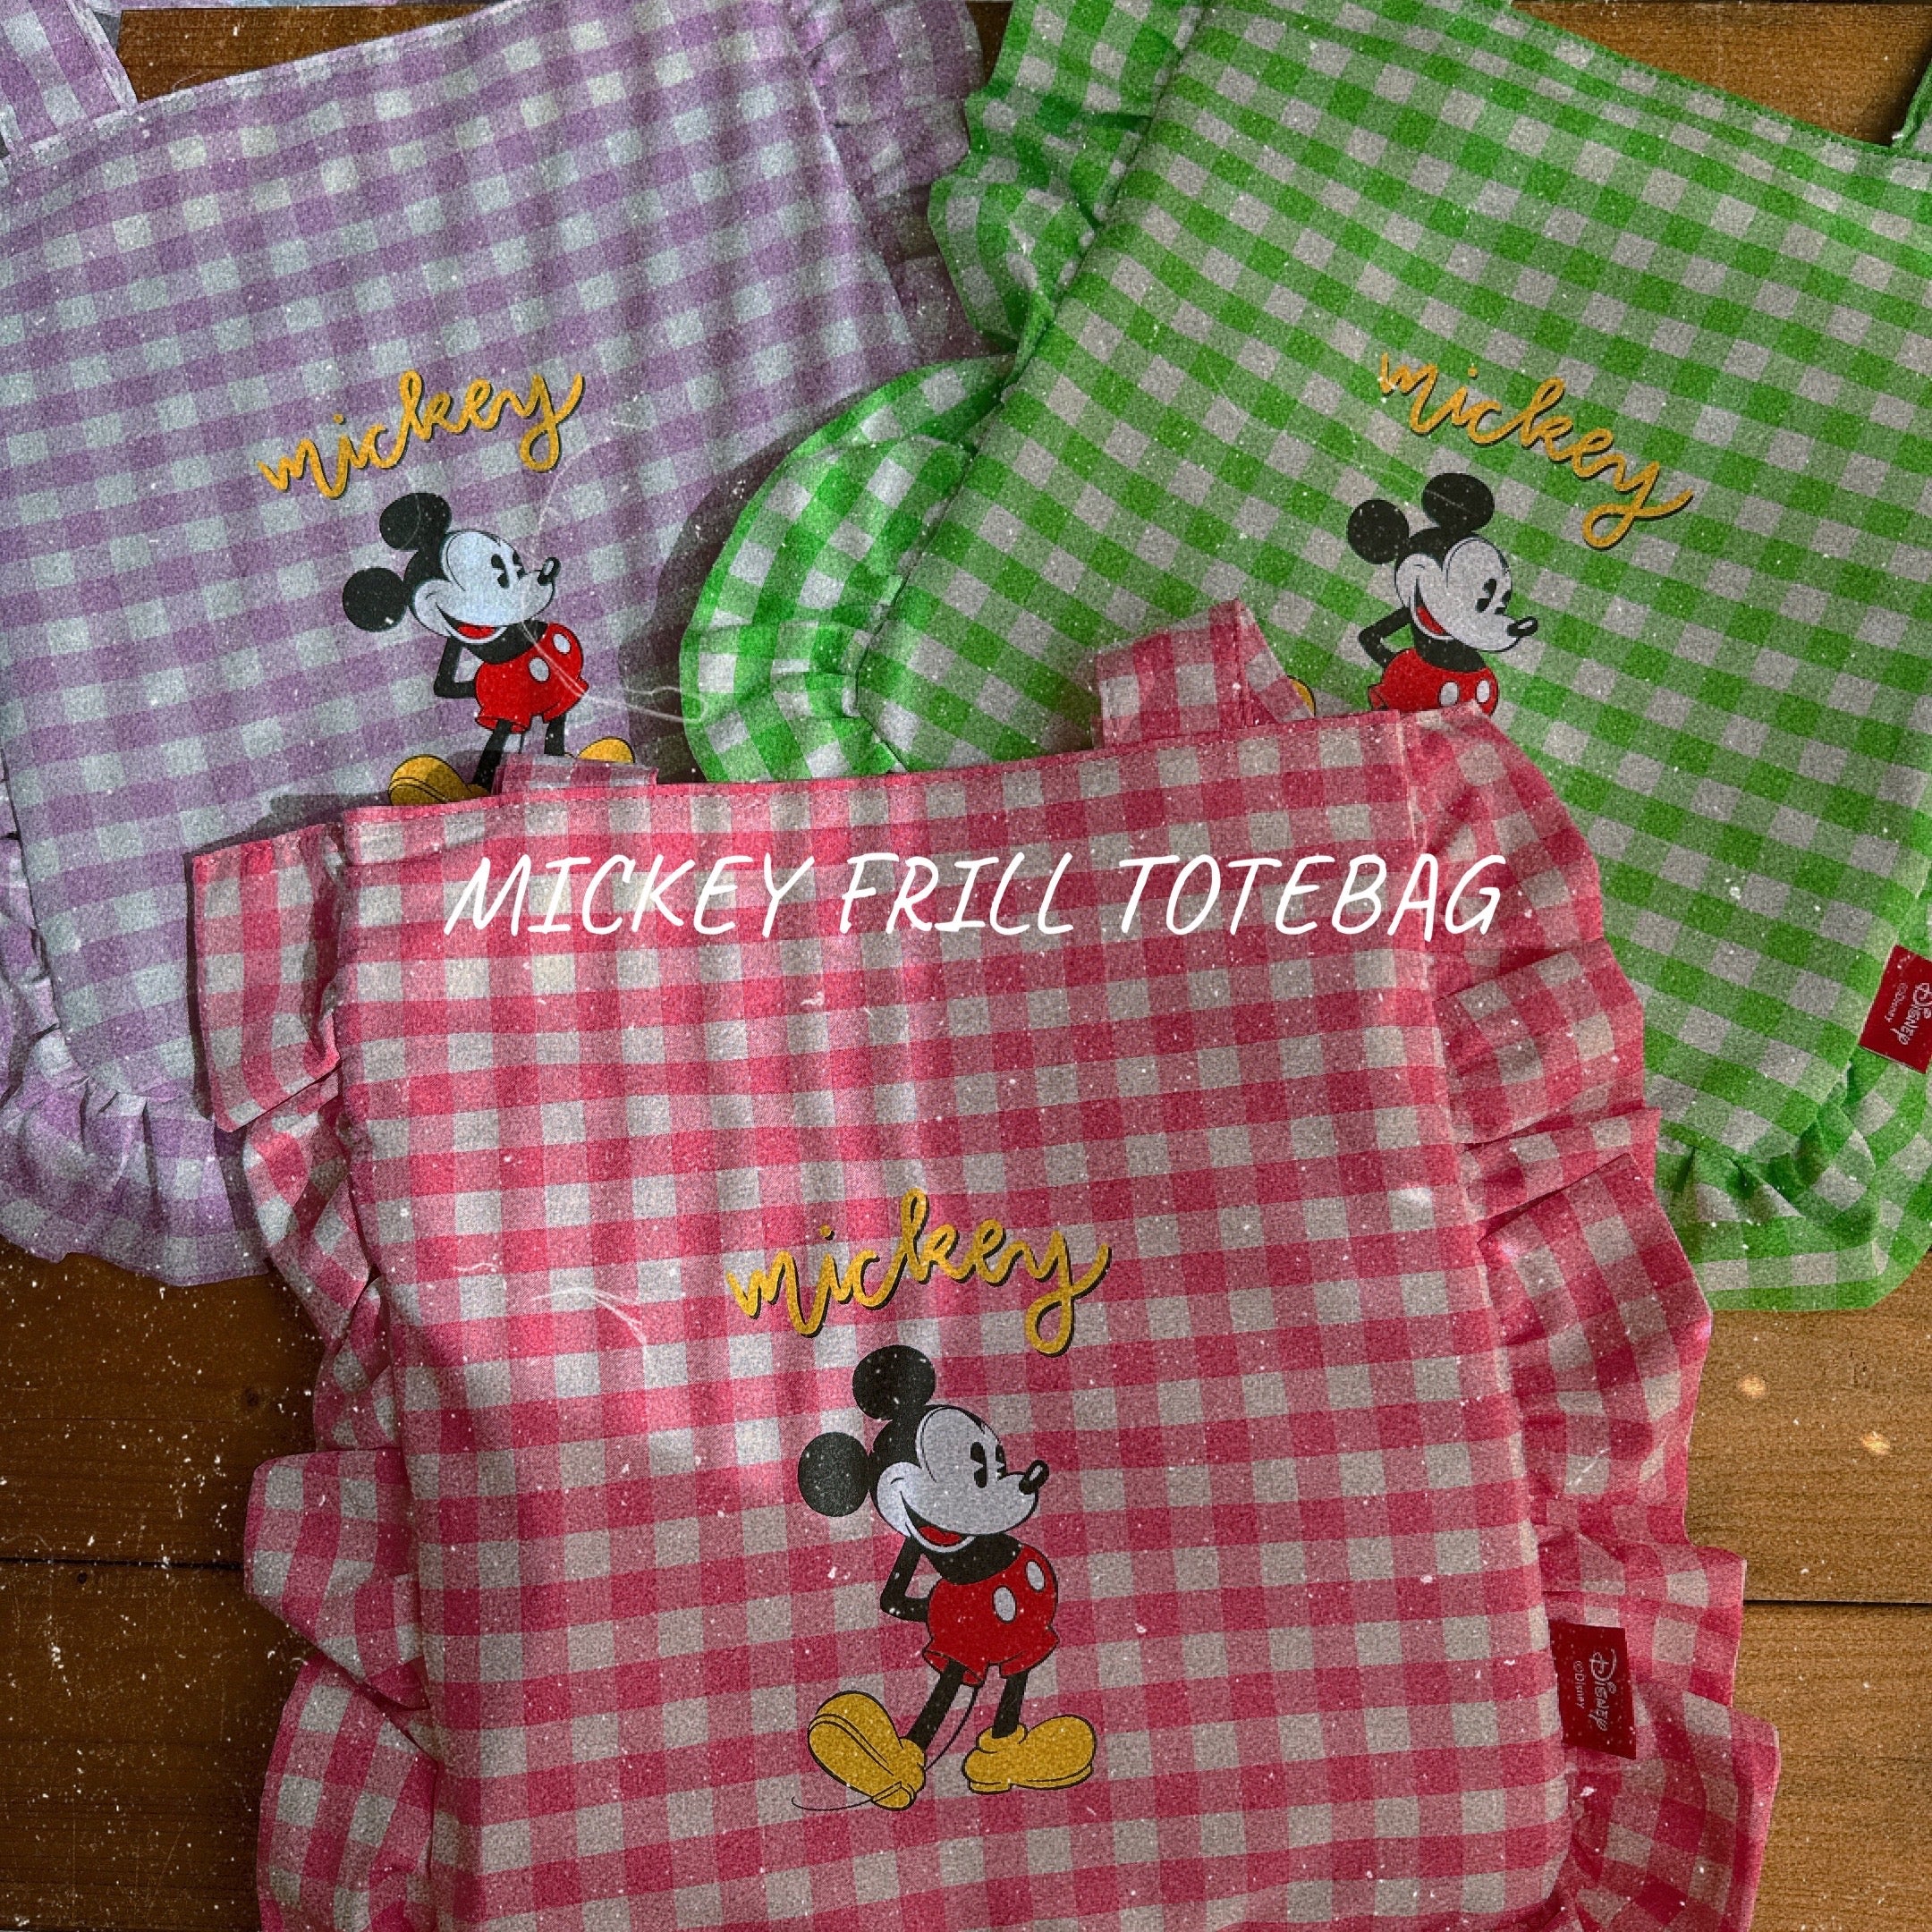 Available now in 3 colors: Mickey gingham check ruffle tote bag